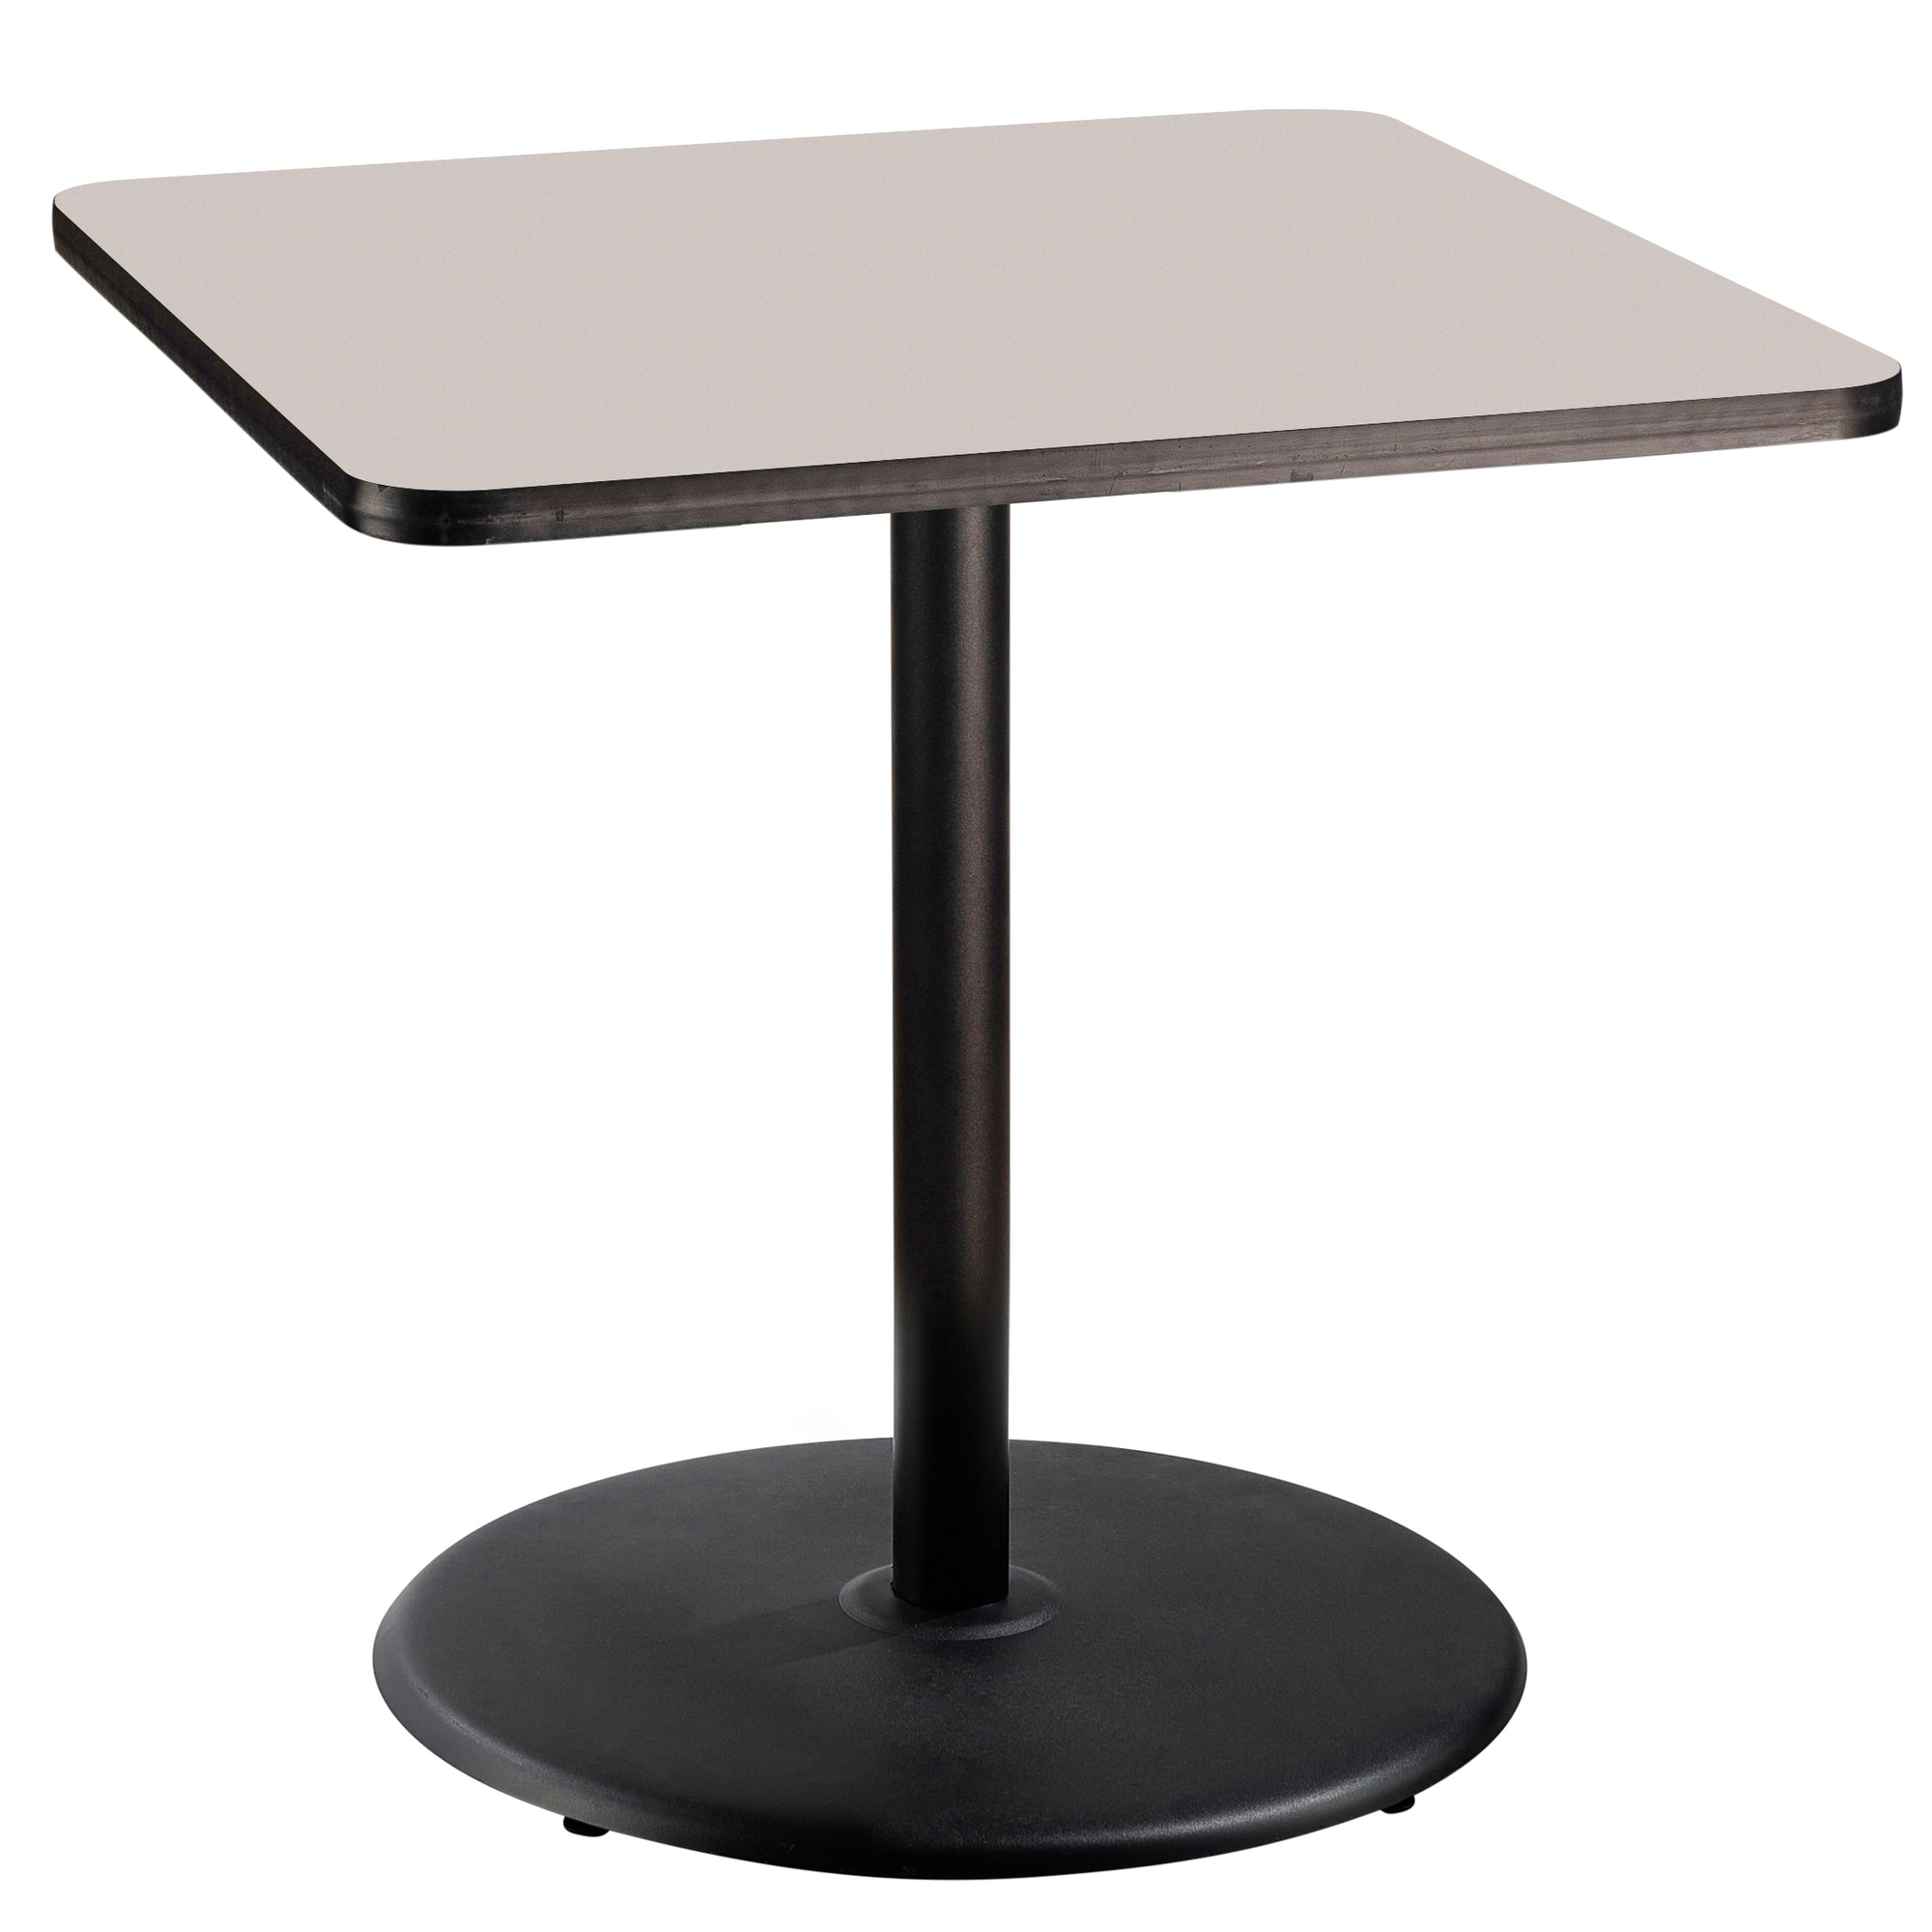 Cafe Table, 36x36x36 Square """"R"""" Base, Height 36 in, Model - National Public Seating CT33636RCPBTMGY